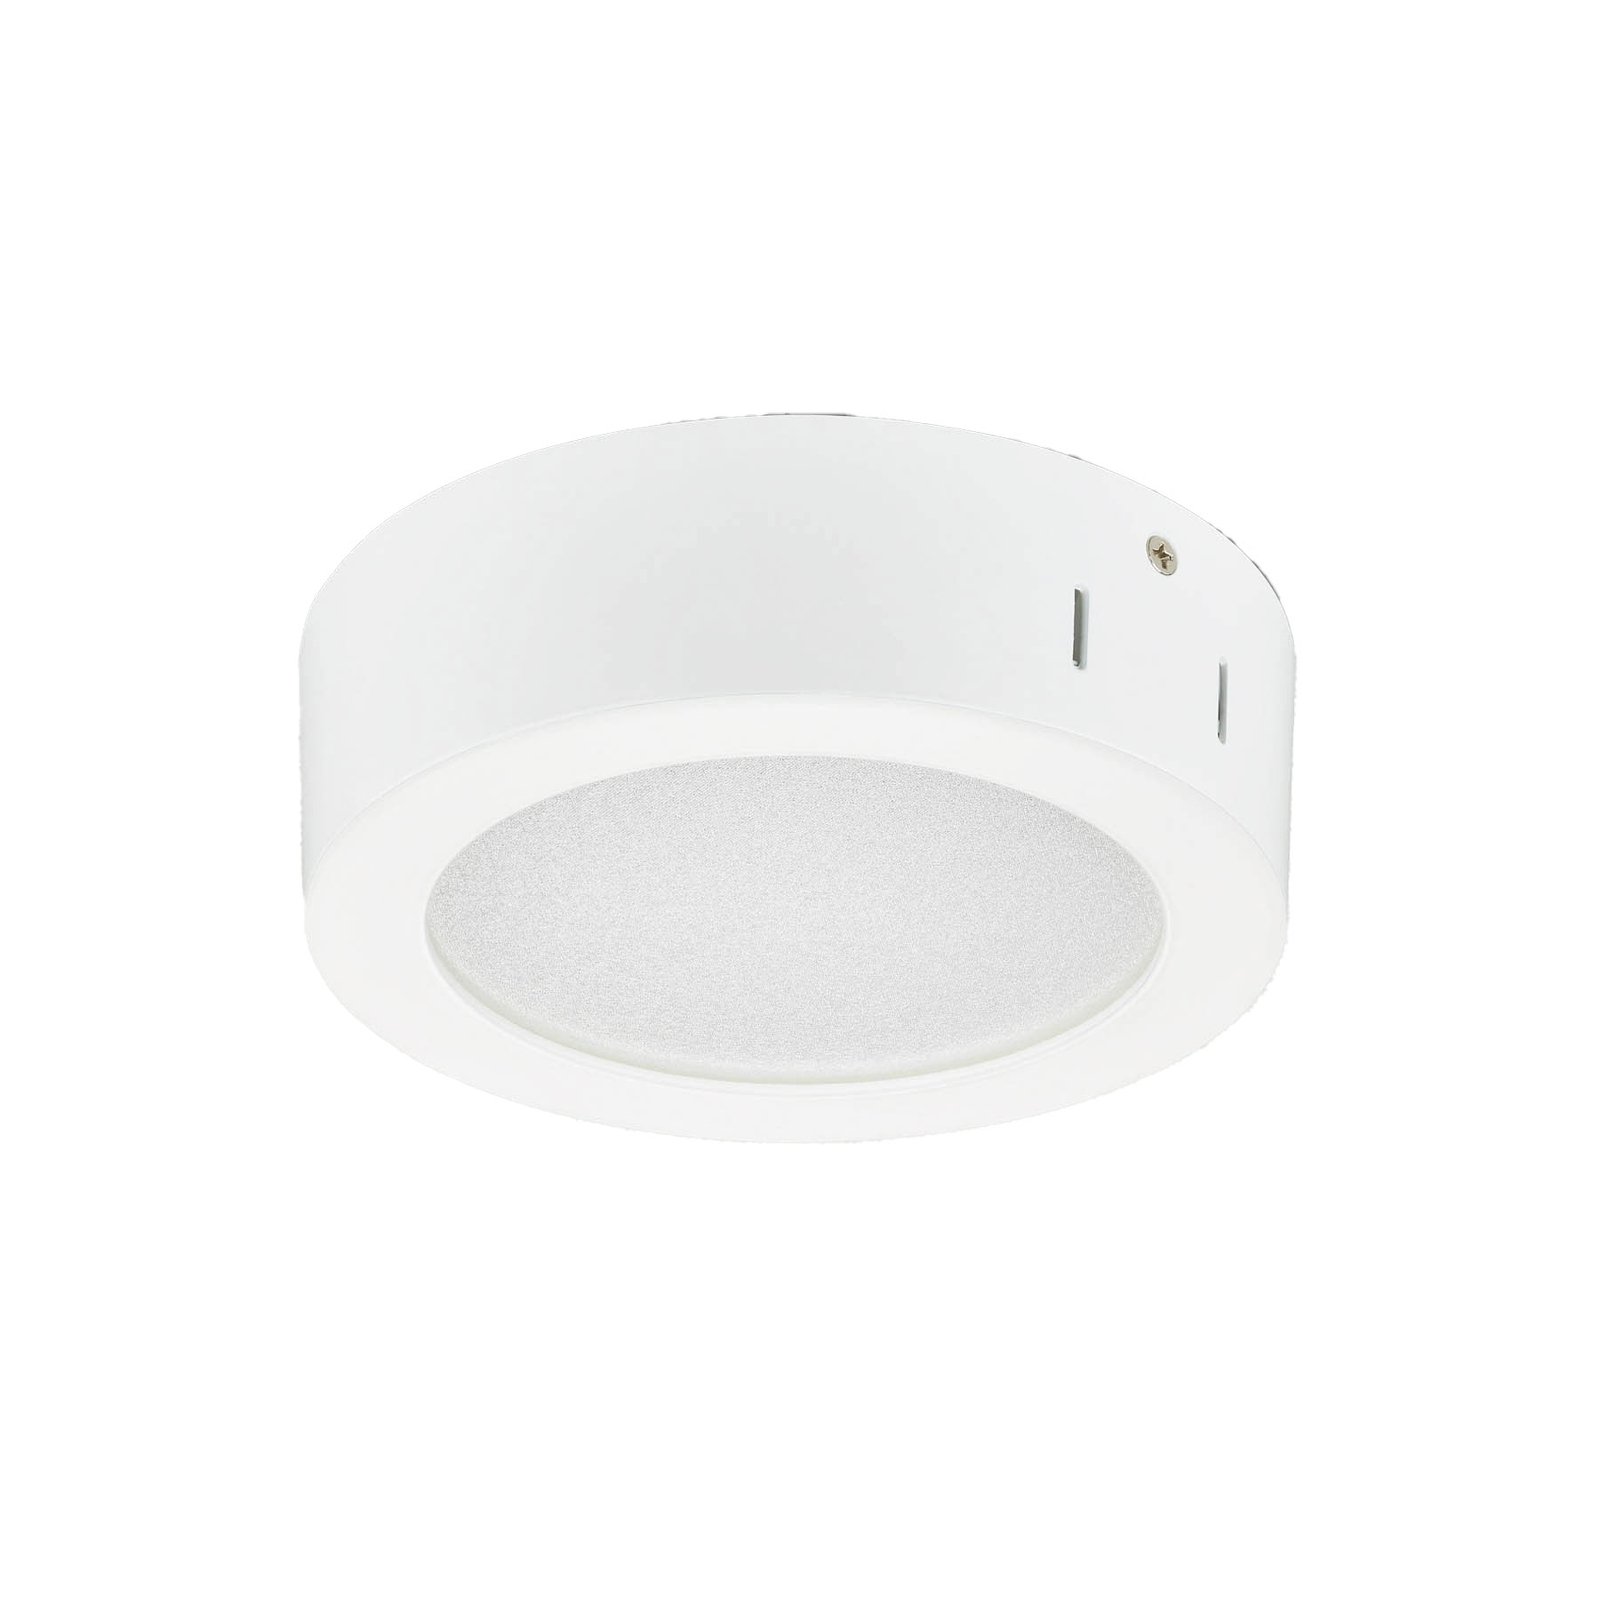 Surface-mounted LED downlight DN145C LED10S/840 PSU II WH